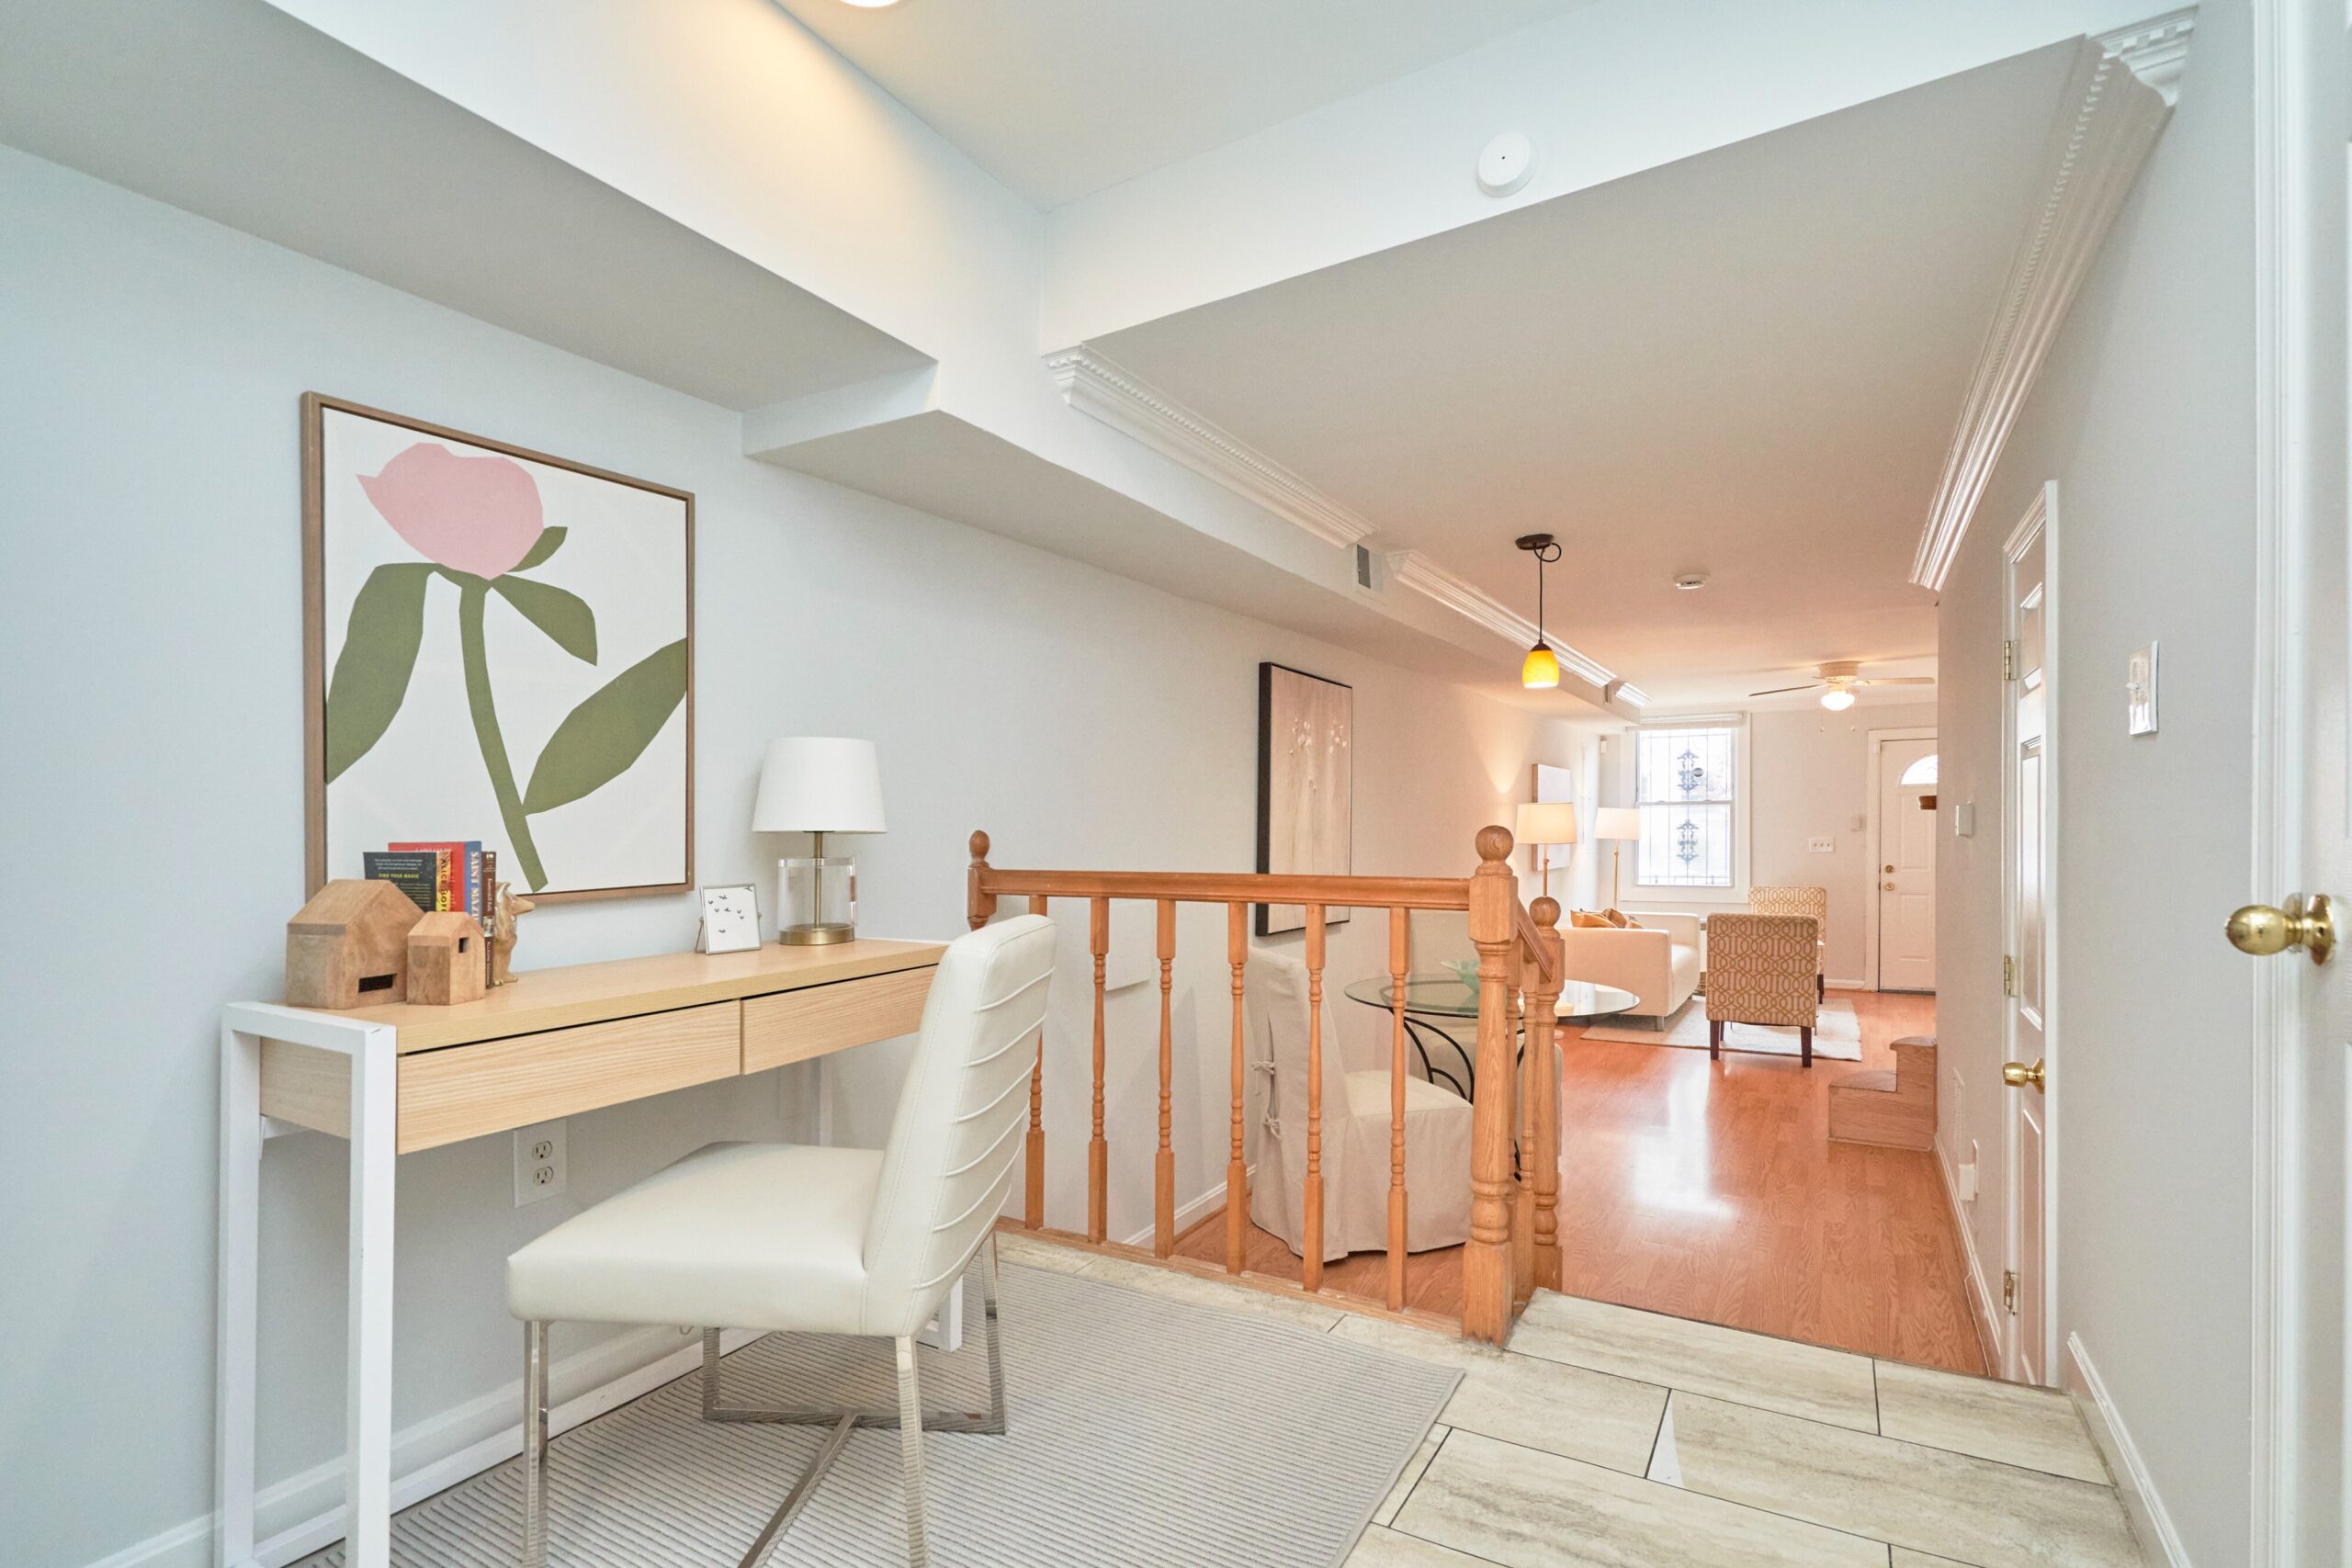 Professional interior photo of 1313 K Street SE, Washington, DC - showing the office space and 2 steps down to the breakfast/dining area and the front living room